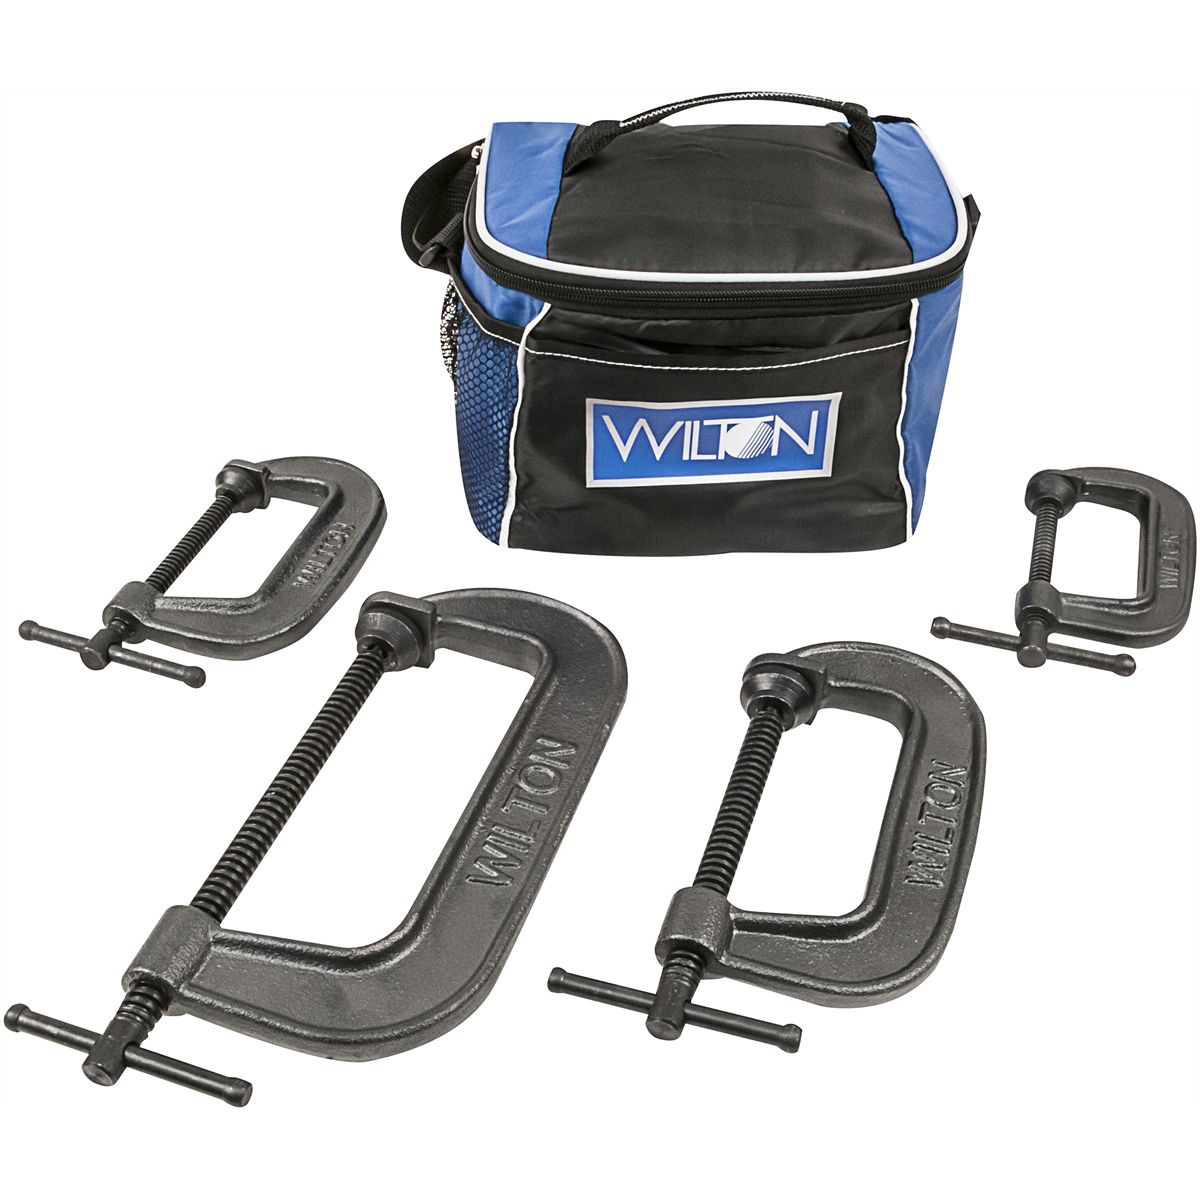 Show Pack; 4 piece C-CLAMPS & Free Cooler Bag